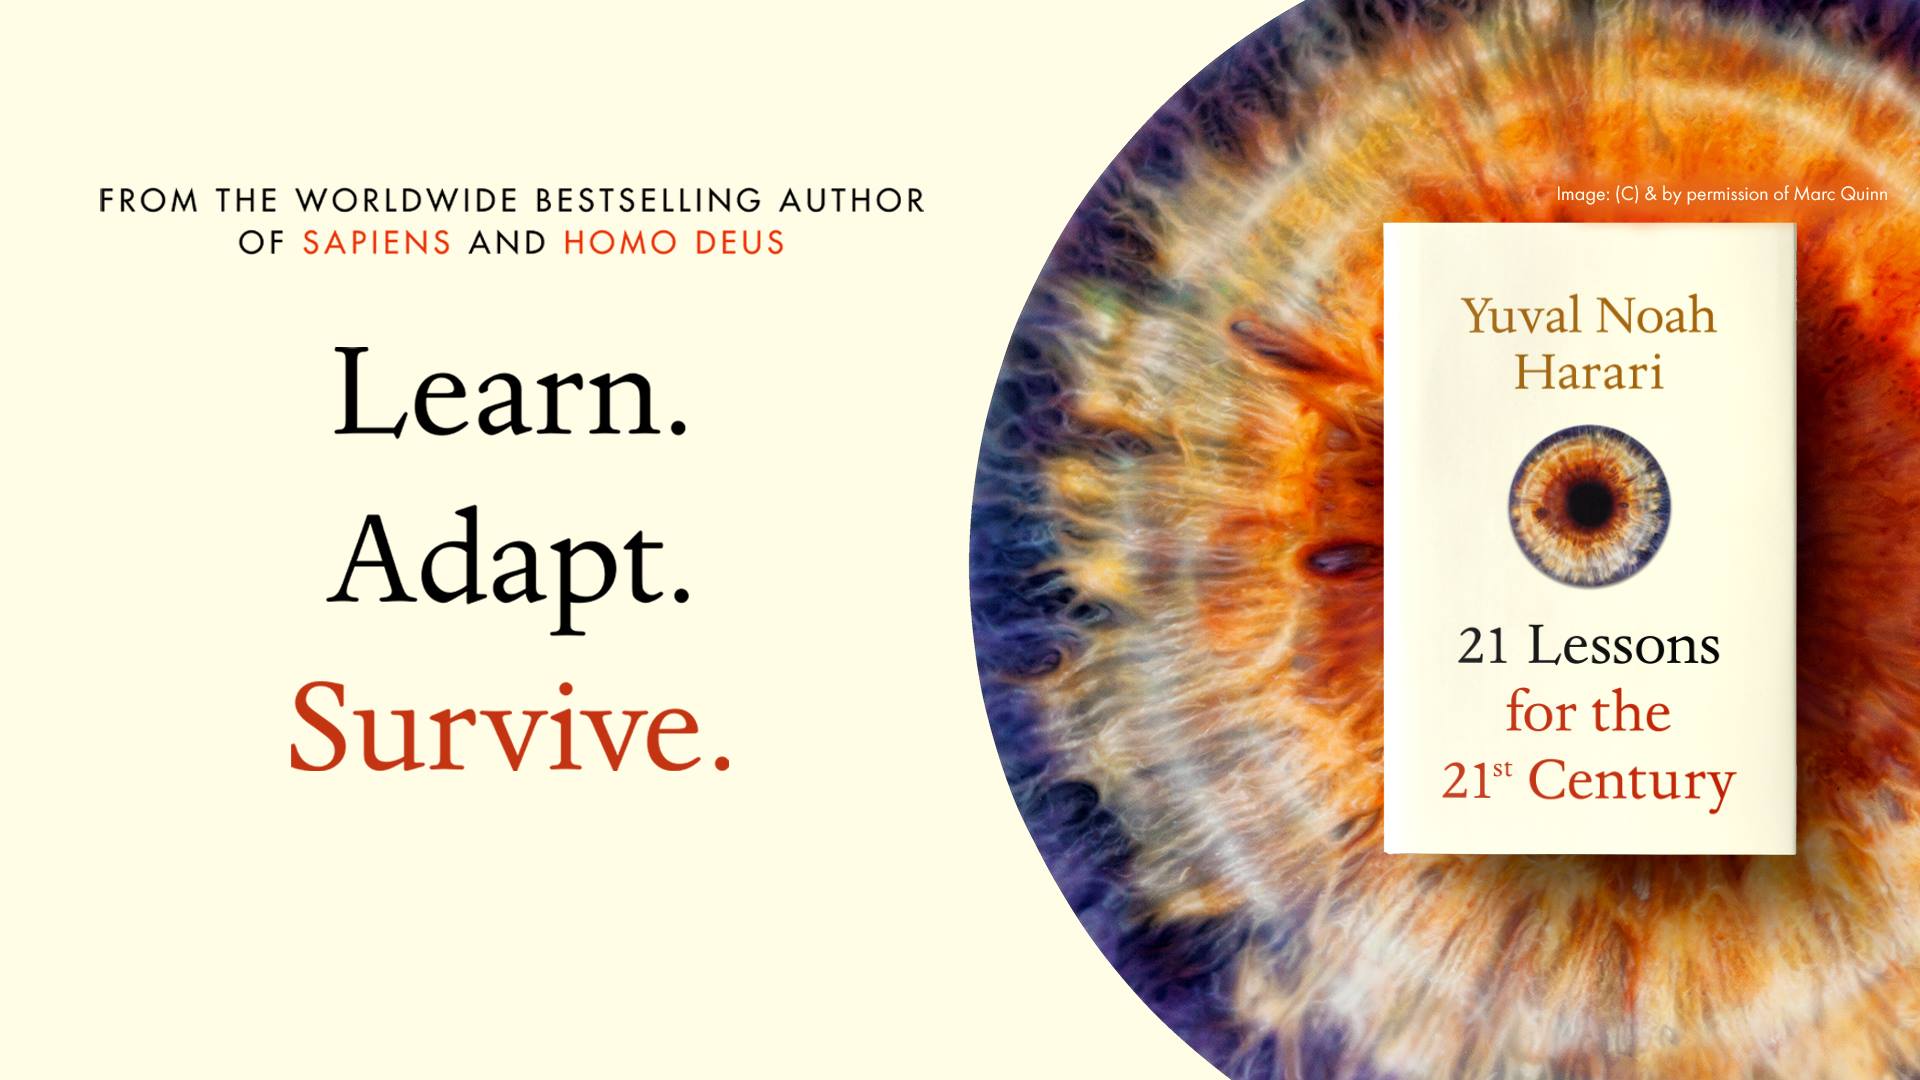 Learn. Adapt. Survive. 21 Lessons for the 21st Century by Yuval Noah Harari.